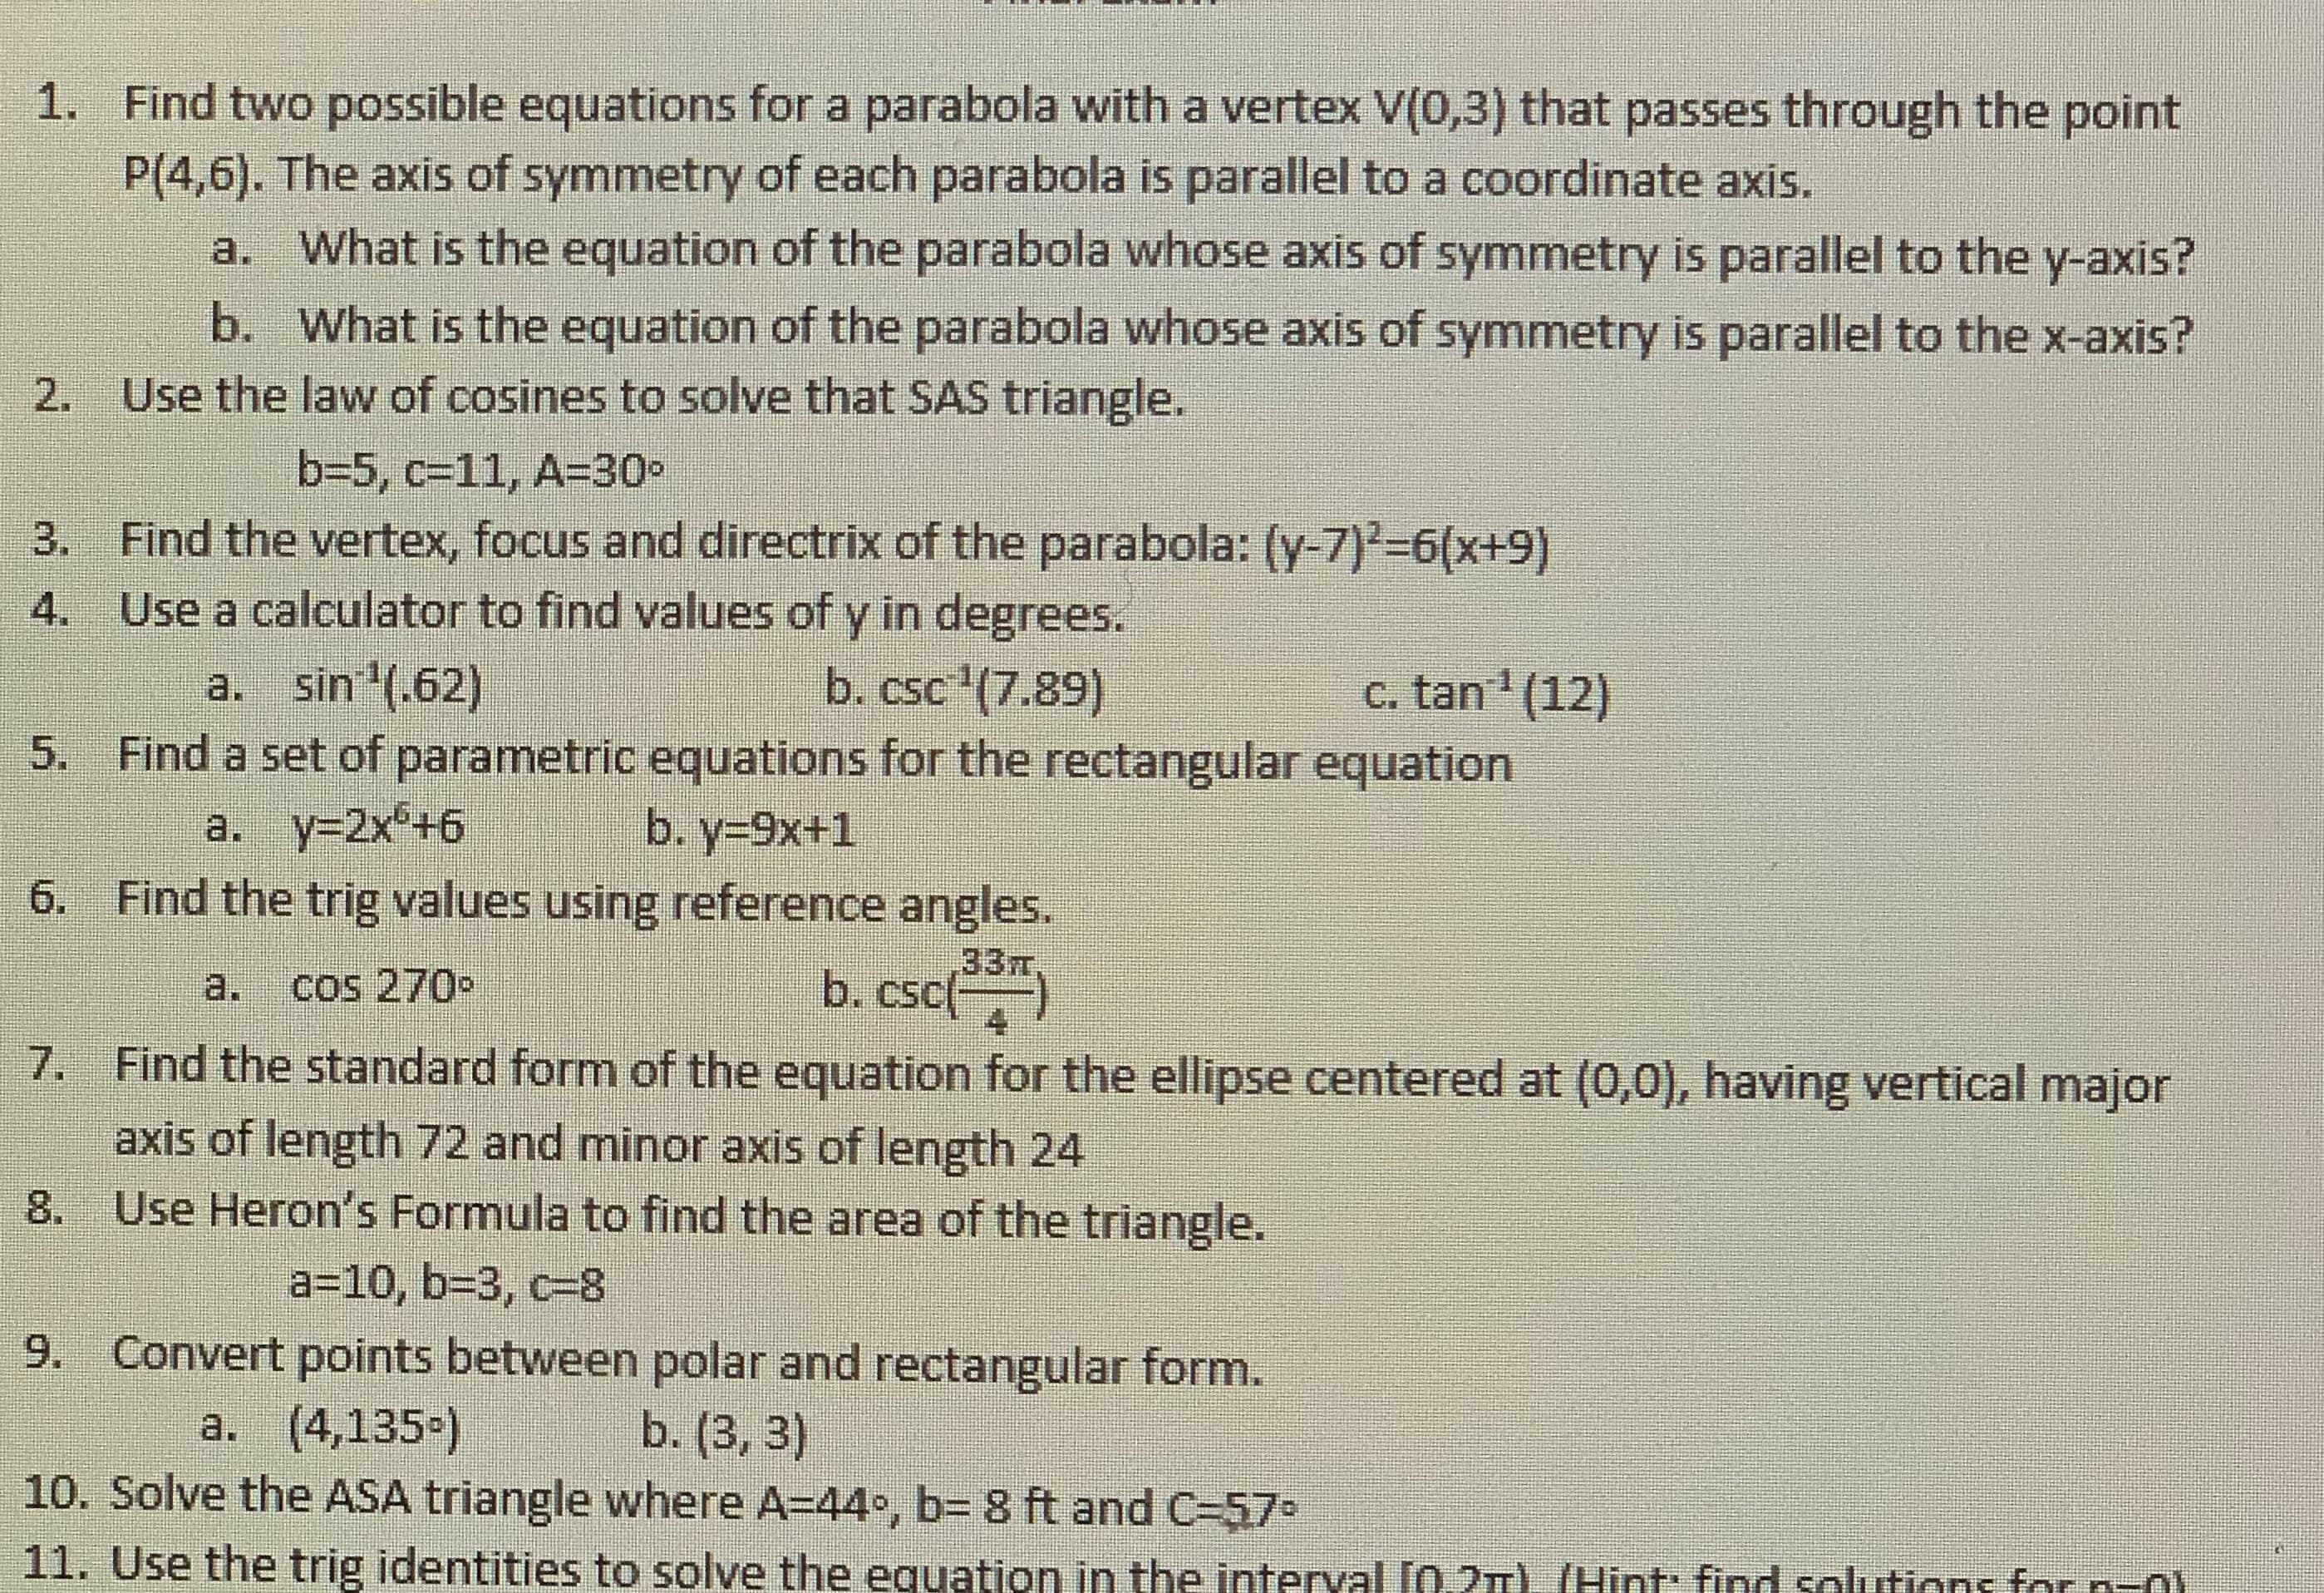 1. Find two possible equations for a parabola with a vertex V(0,3) that passes through the point
P(4,6). The axis of symmetry of each parabola is parallel to a coordinate axis.
a. What is the equation of the parabola whose axis of symmetry is parallel to the y-axis?
b. What is the equation of the parabola whose axis of symmetry is parallel to the x-axis?
2. Use the law of cosines to solve that SAS triangle.
b=5, c=11, A=30-
3. Find the vertex, focus and directrix of the parabola: (y-7)2-6(x+9)
Use a calculator to find values of y in degrees.
4.
a. sin (.62)
b. csc '(7.89)
c. tan (12)
5. Find a set of parametric equations for the rectangular equation
b. y-9x+1
a. y=2x +6
6. Find the trig values using reference angles.
33m,
b. csc()
7. Find the standard form of the equation for the ellipse centered at (0,0), having vertical major
a.
cos 270•
axis of length 72 and minor axis of length 24
8. Use Heron's Formula to find the area of the triangle.
a=10, b3D3, c=8
9. Convert points between polar and rectangular form.
b. (3, 3)
10. Solve the ASA triangle where A=44•, b= 8 ft and C=57
a. (4,135-)
11. Use the trig identities to solve the equation in the interval (0.2) (Hint: find solutions for n-01
